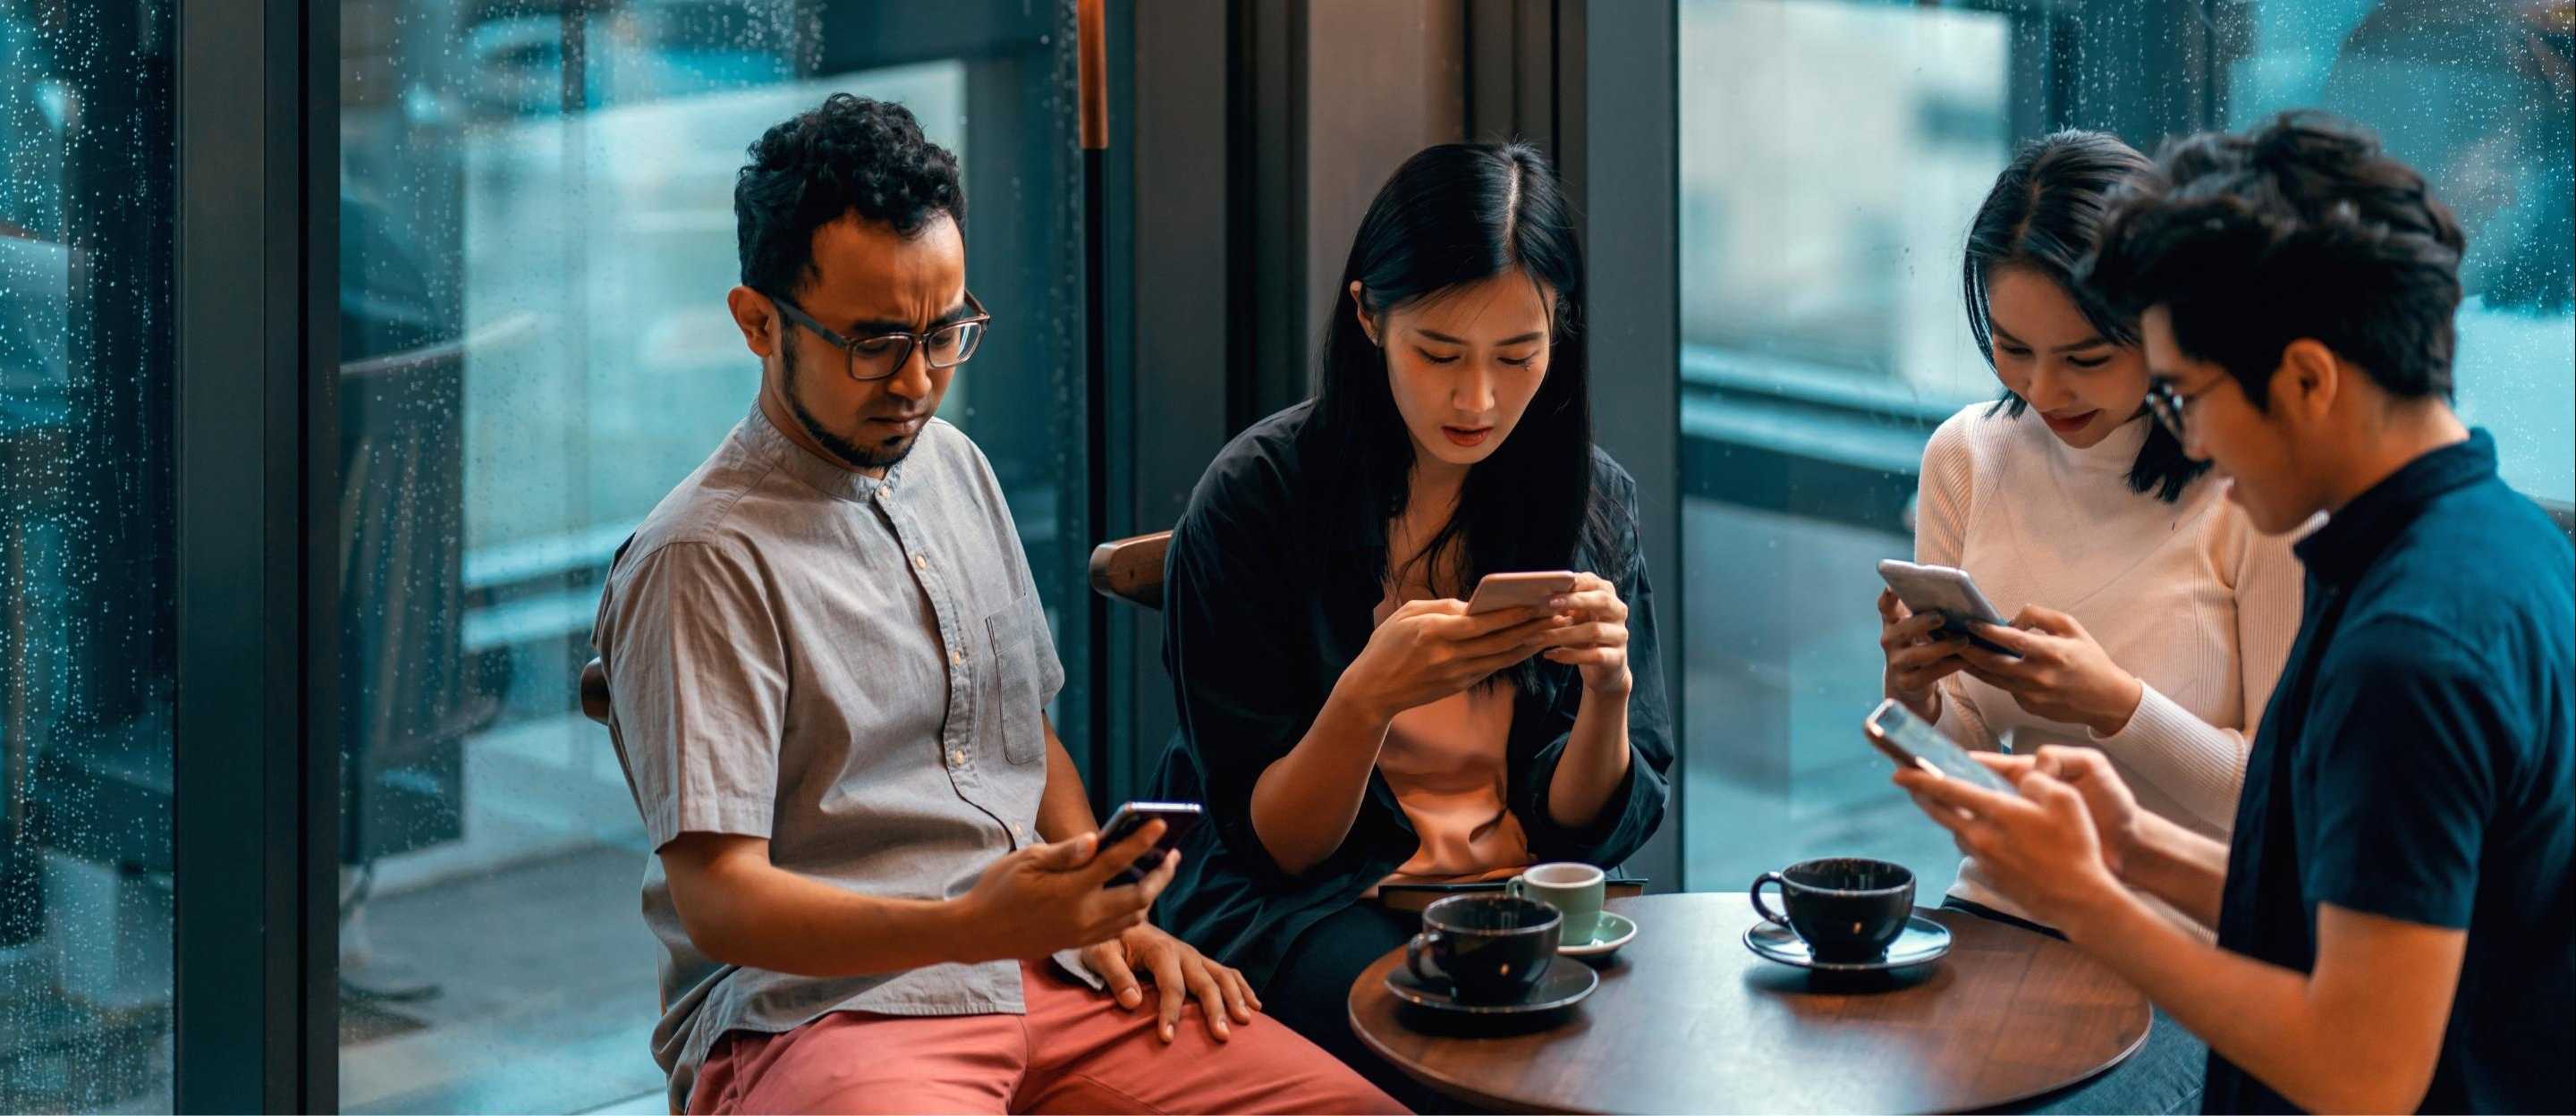 Two women and two men sit at a table and stare at their mobile phones.